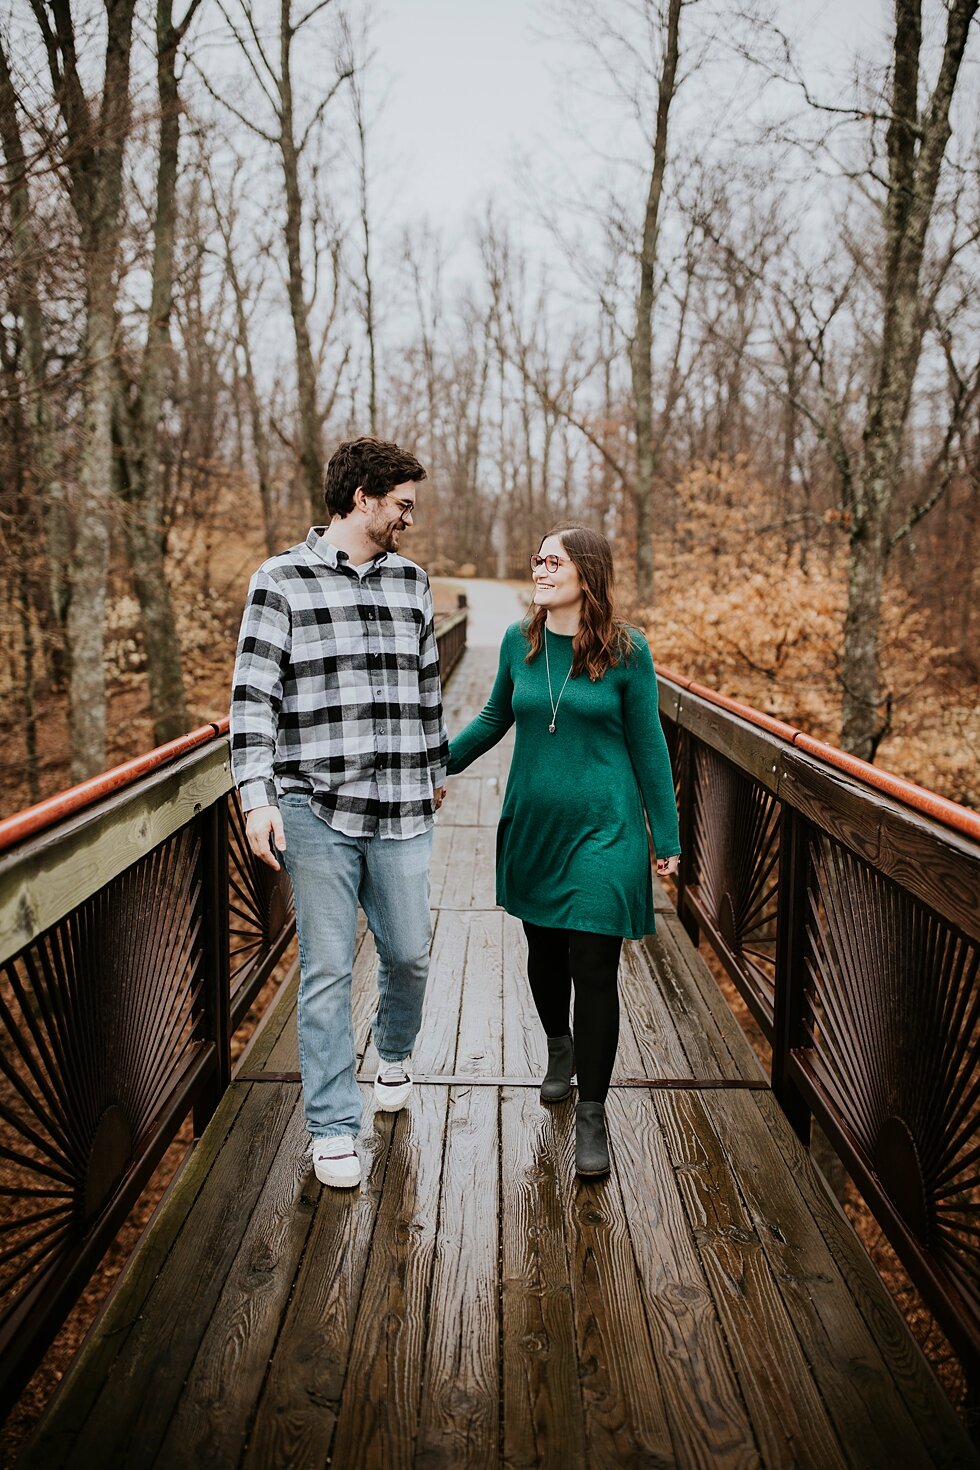  Winter rainy day for this engaged couple to take their engagement and save the date photos in Louisville, Kentucky! Louisville photographer winter engagement Bernheim Forest emerald green dress plaid shirt rainy day Kentucky couple outdoor engagemen